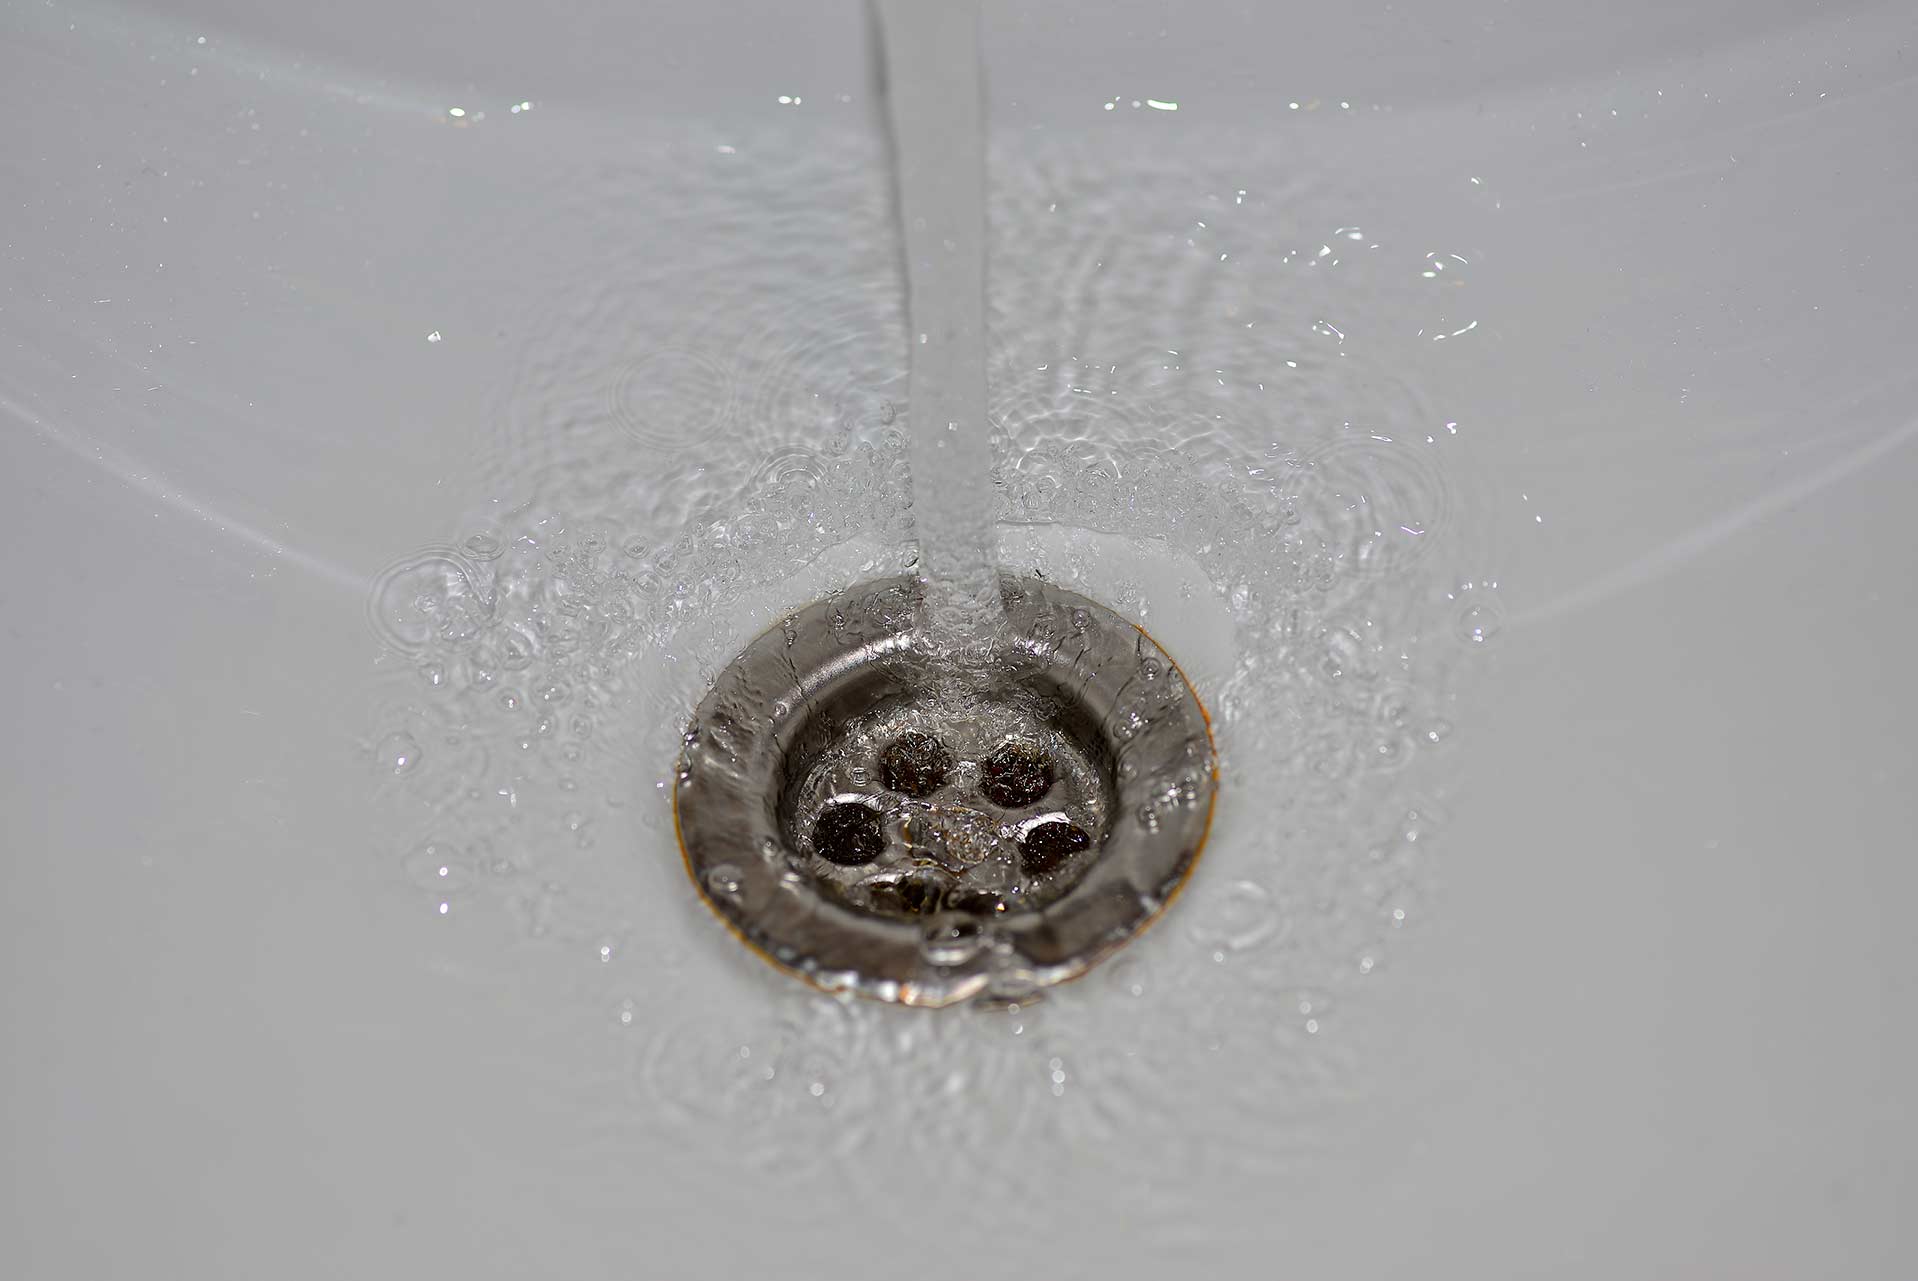 A2B Drains provides services to unblock blocked sinks and drains for properties in Waterloo.